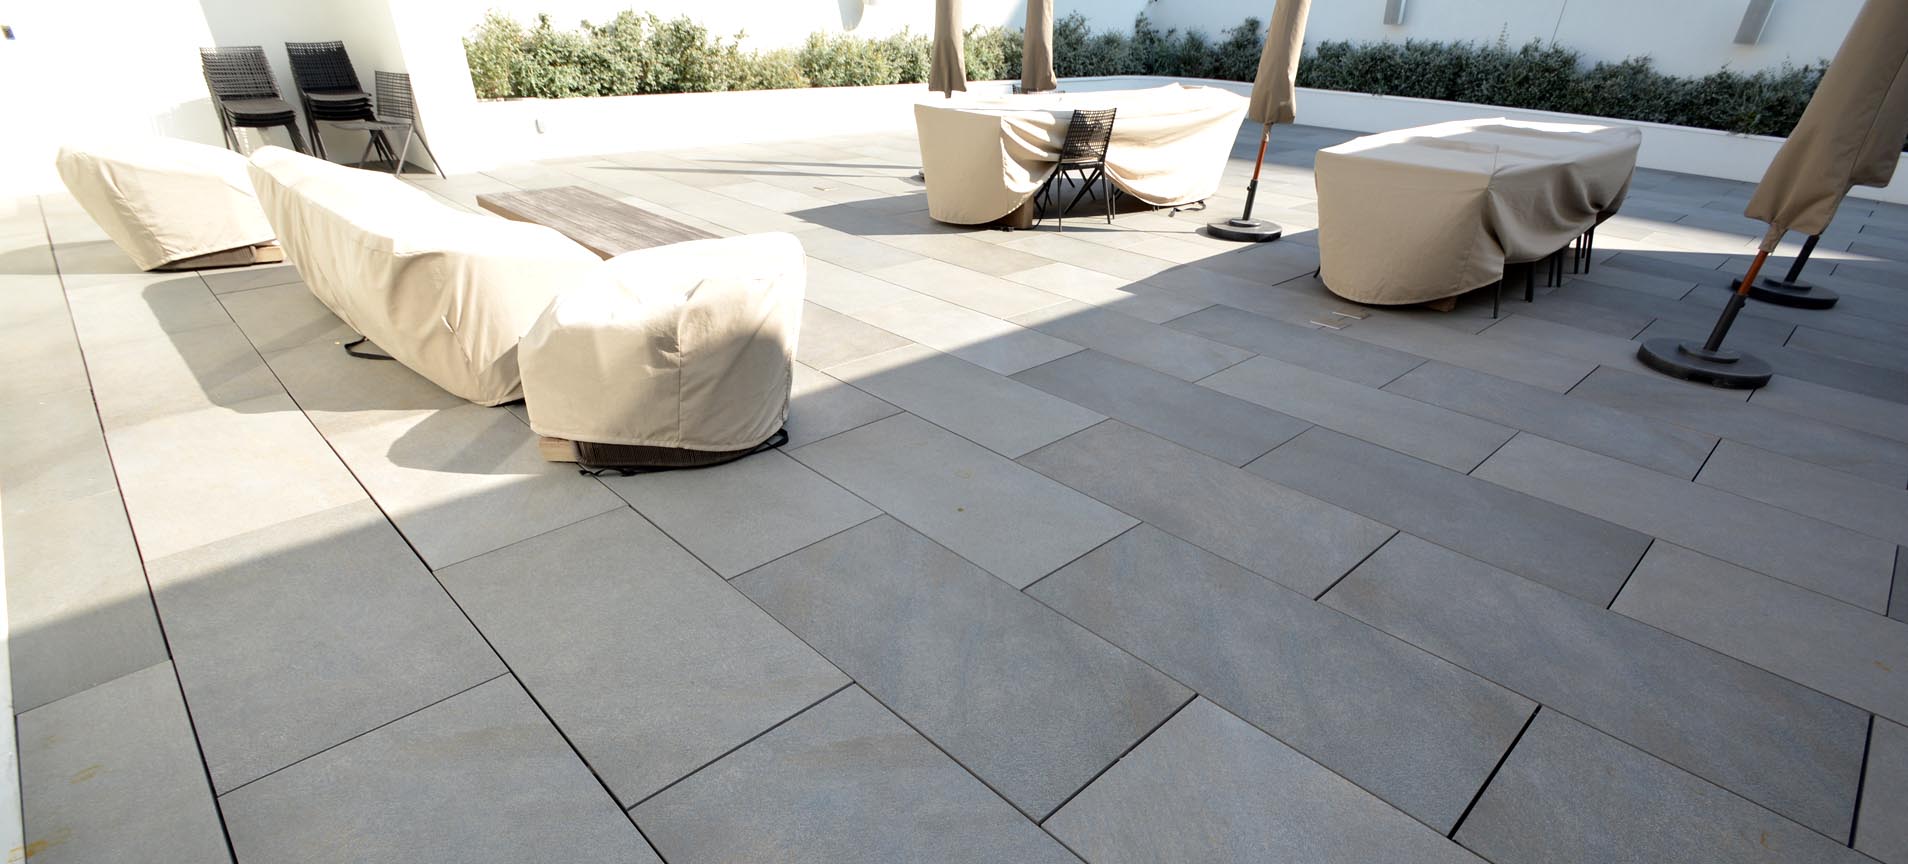 How Much Do Porcelain Pavers Cost? - Tile Tech Pavers®